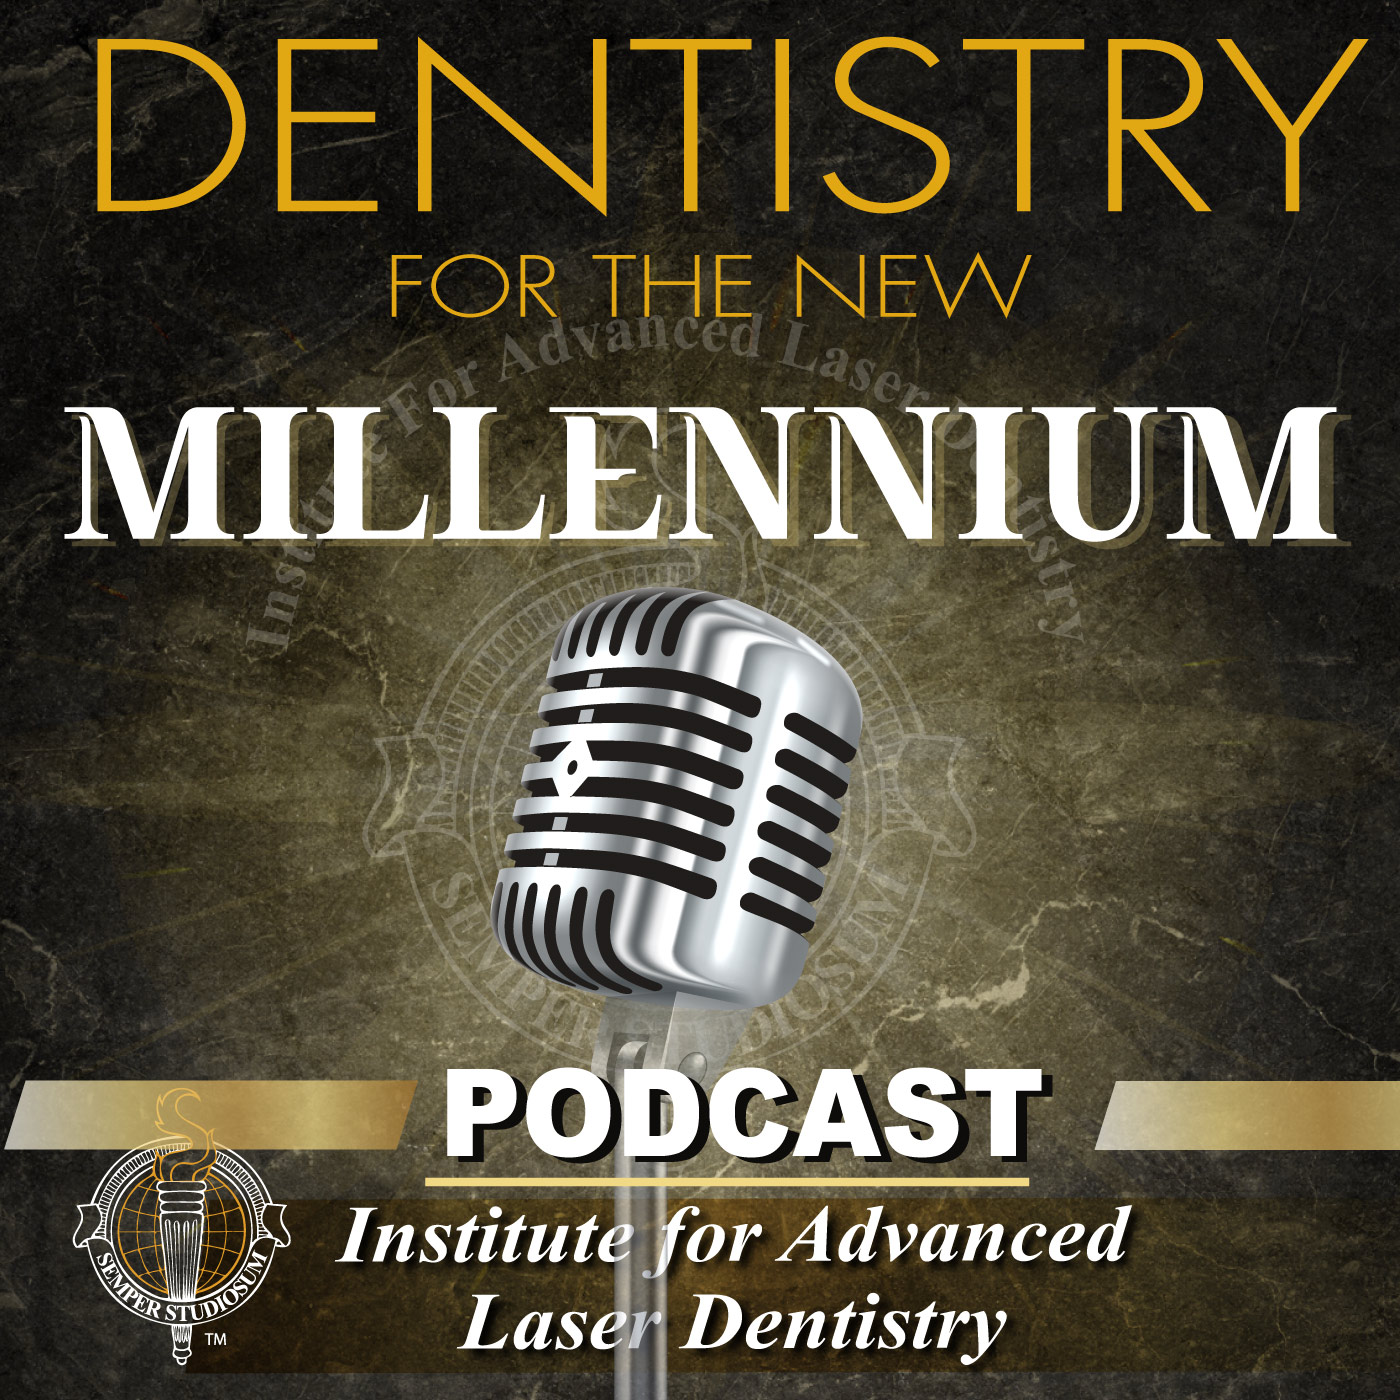 Dentistry for the New Millennium Educational Podcast Launches Internationally